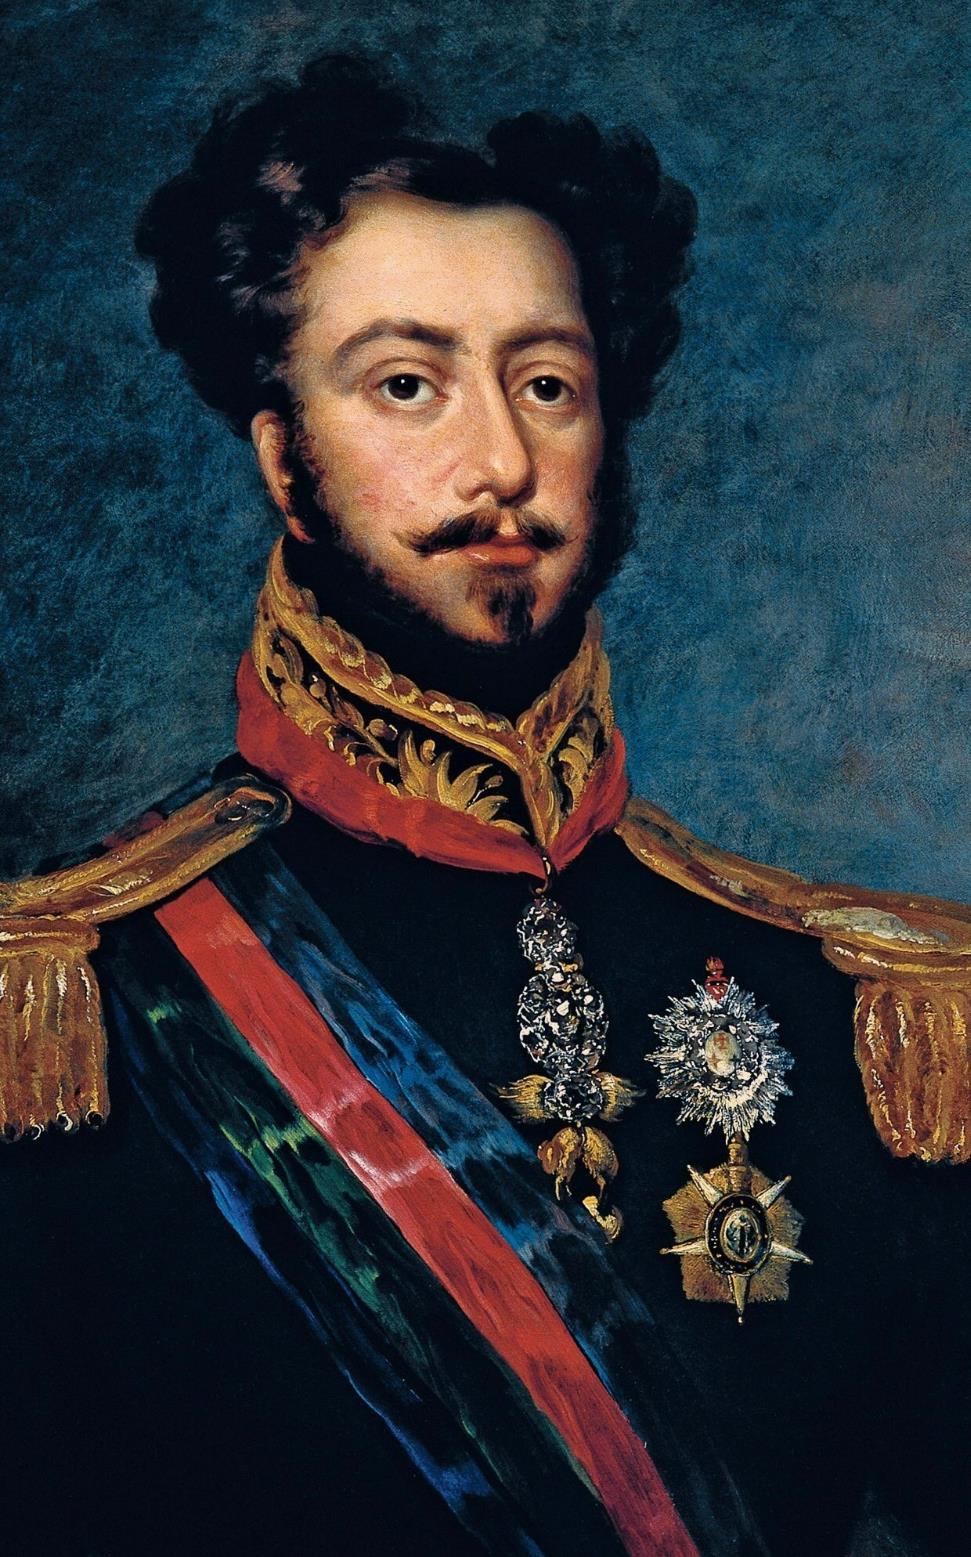 Brazil s Royal Liberator A Bloodless Revolution 1807: Napoleon invades Portugal; royal family flees to Brazil 1815: King John VI returns to Portugal after Napoleon s defeat, but his son, prince Dom